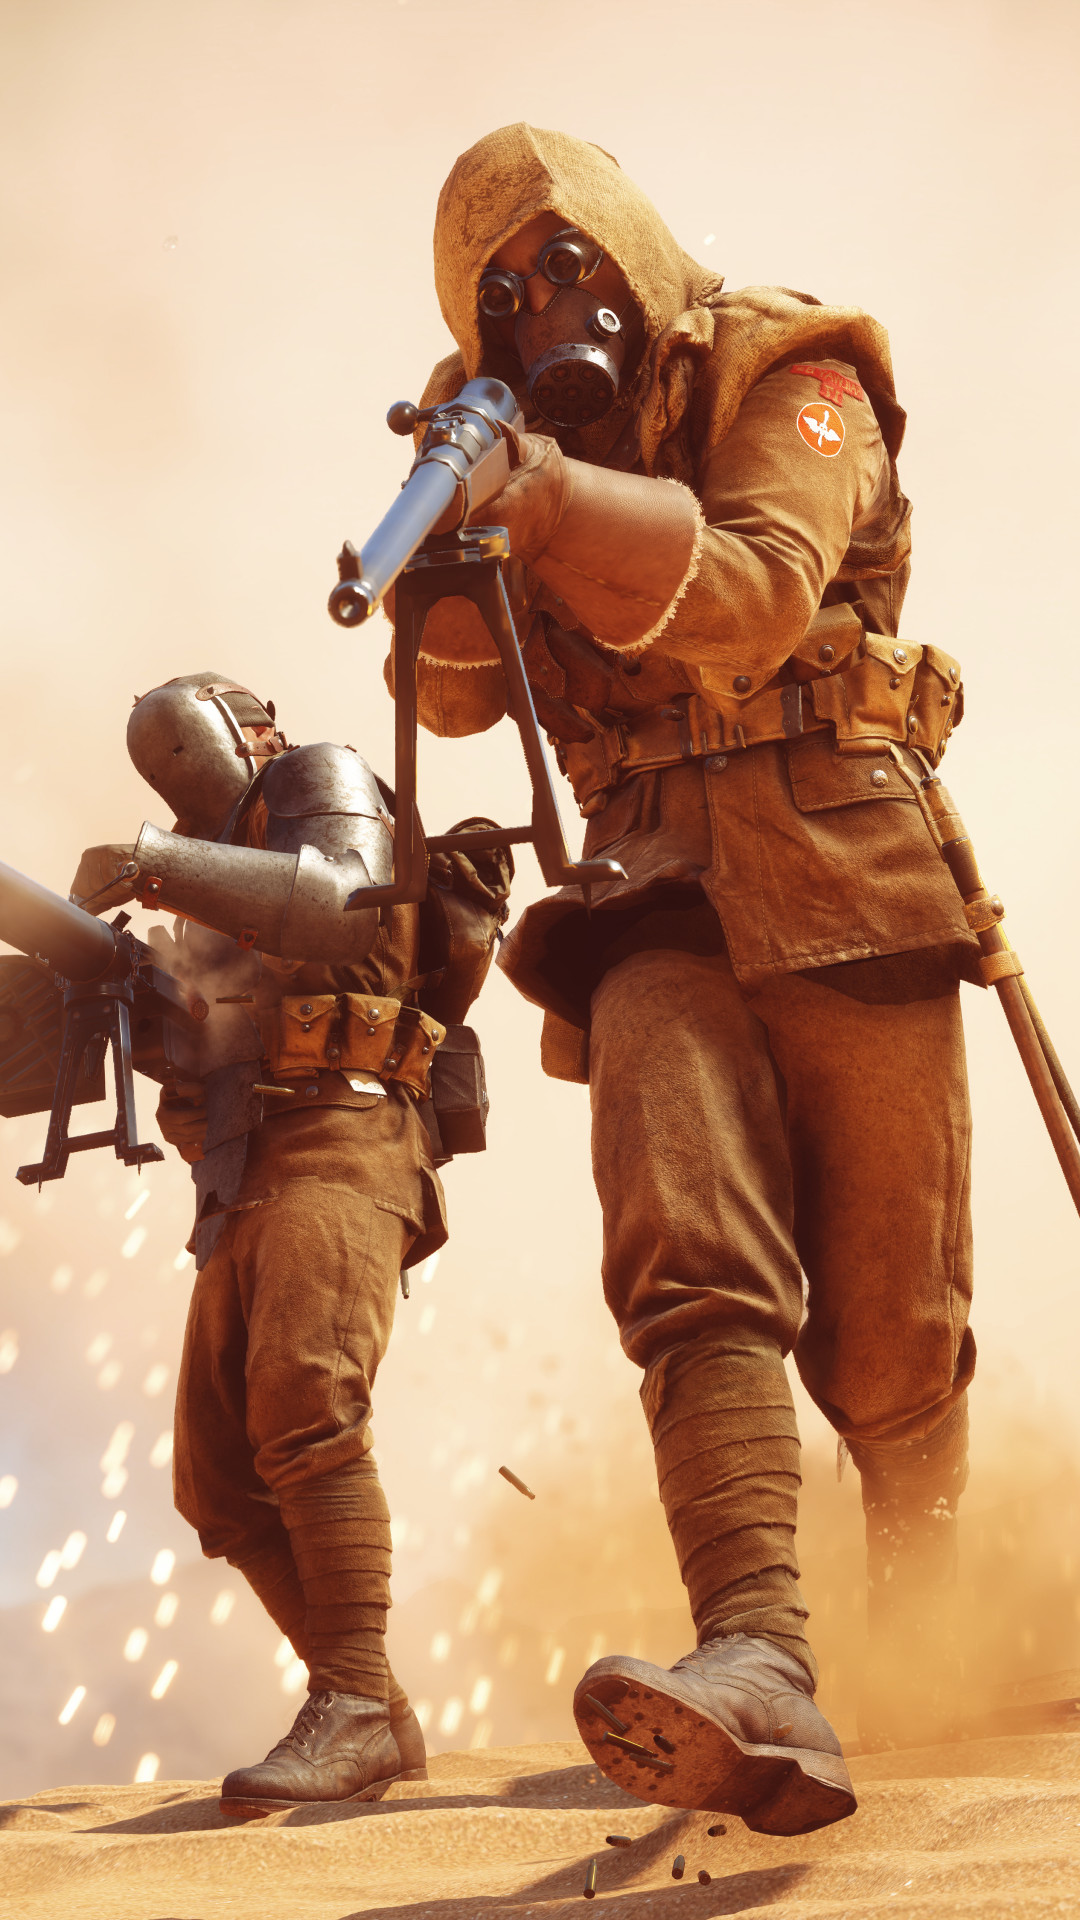 Download this Wallpaper iPhone 5S – Video Game/Battlefield 1 (1080×1920)  for all